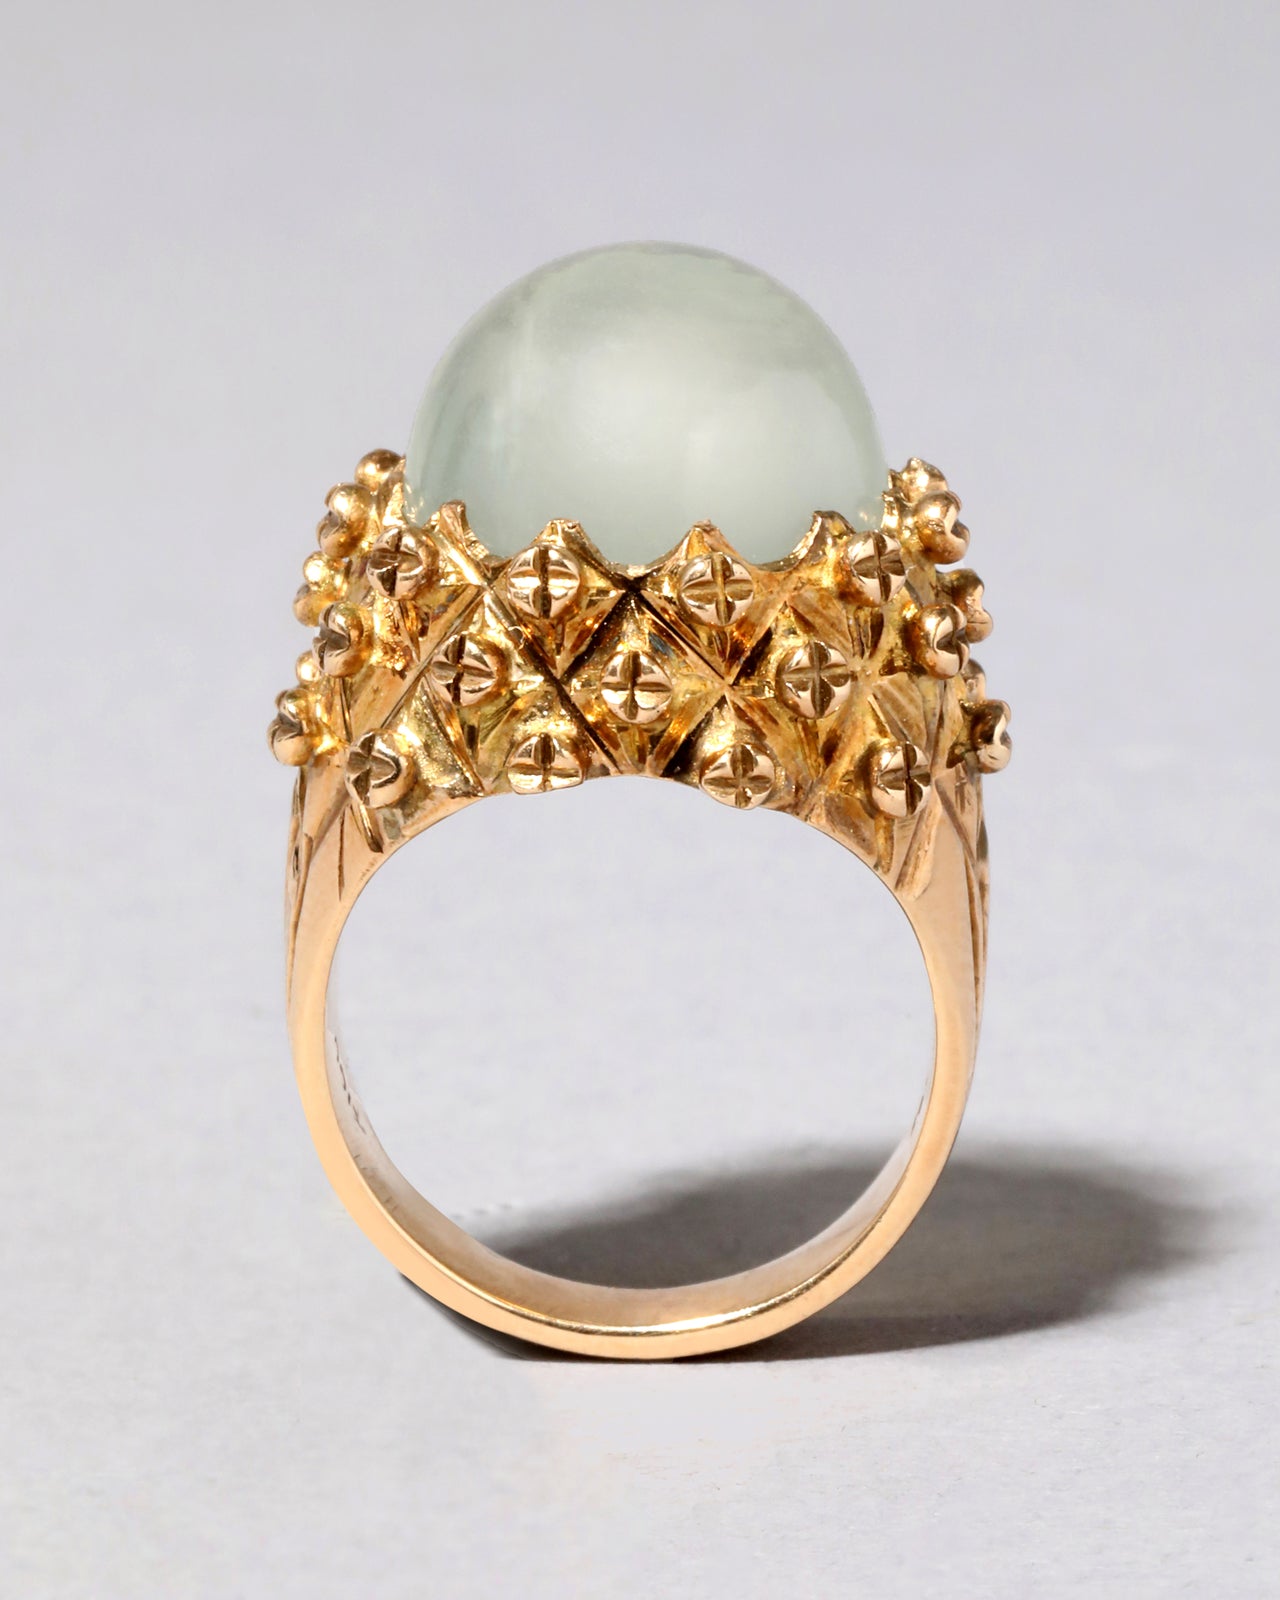 Vintage 14k Gold and Moonstone Orb Cocktail Ring - Photo 2